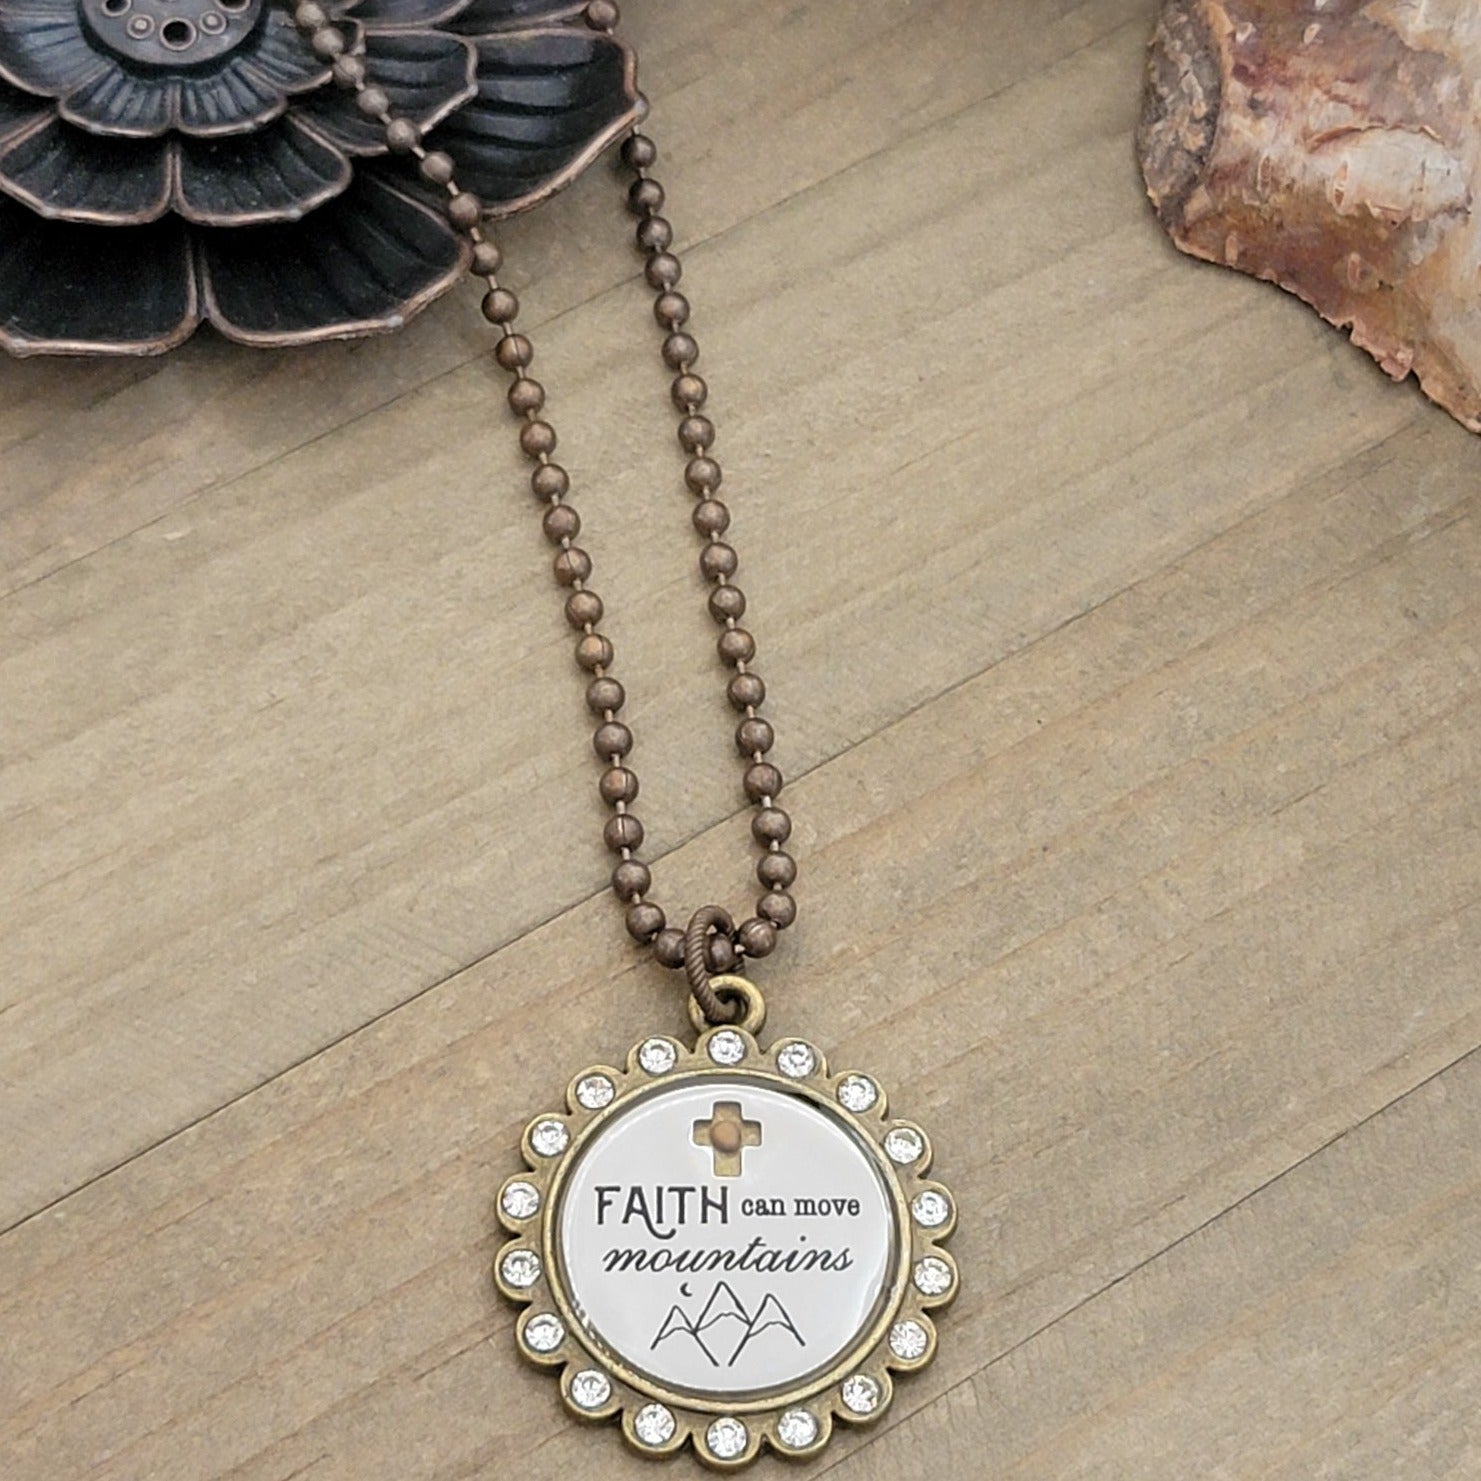 Faith Can Move Mountains Mustard Seed Necklace - Nicki Lynn Jewelry